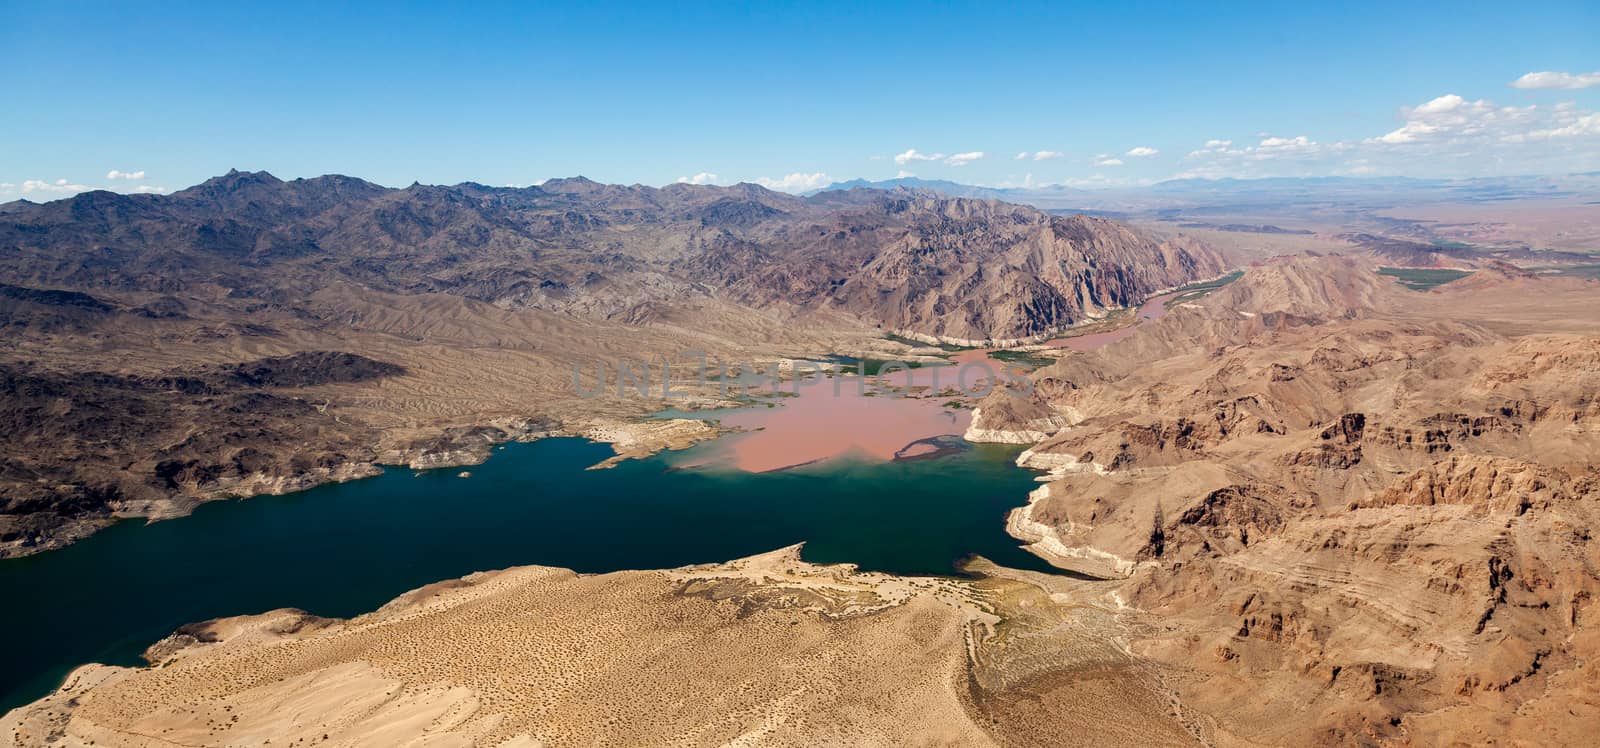 Colorado River joins Lake Mead by phil_bird